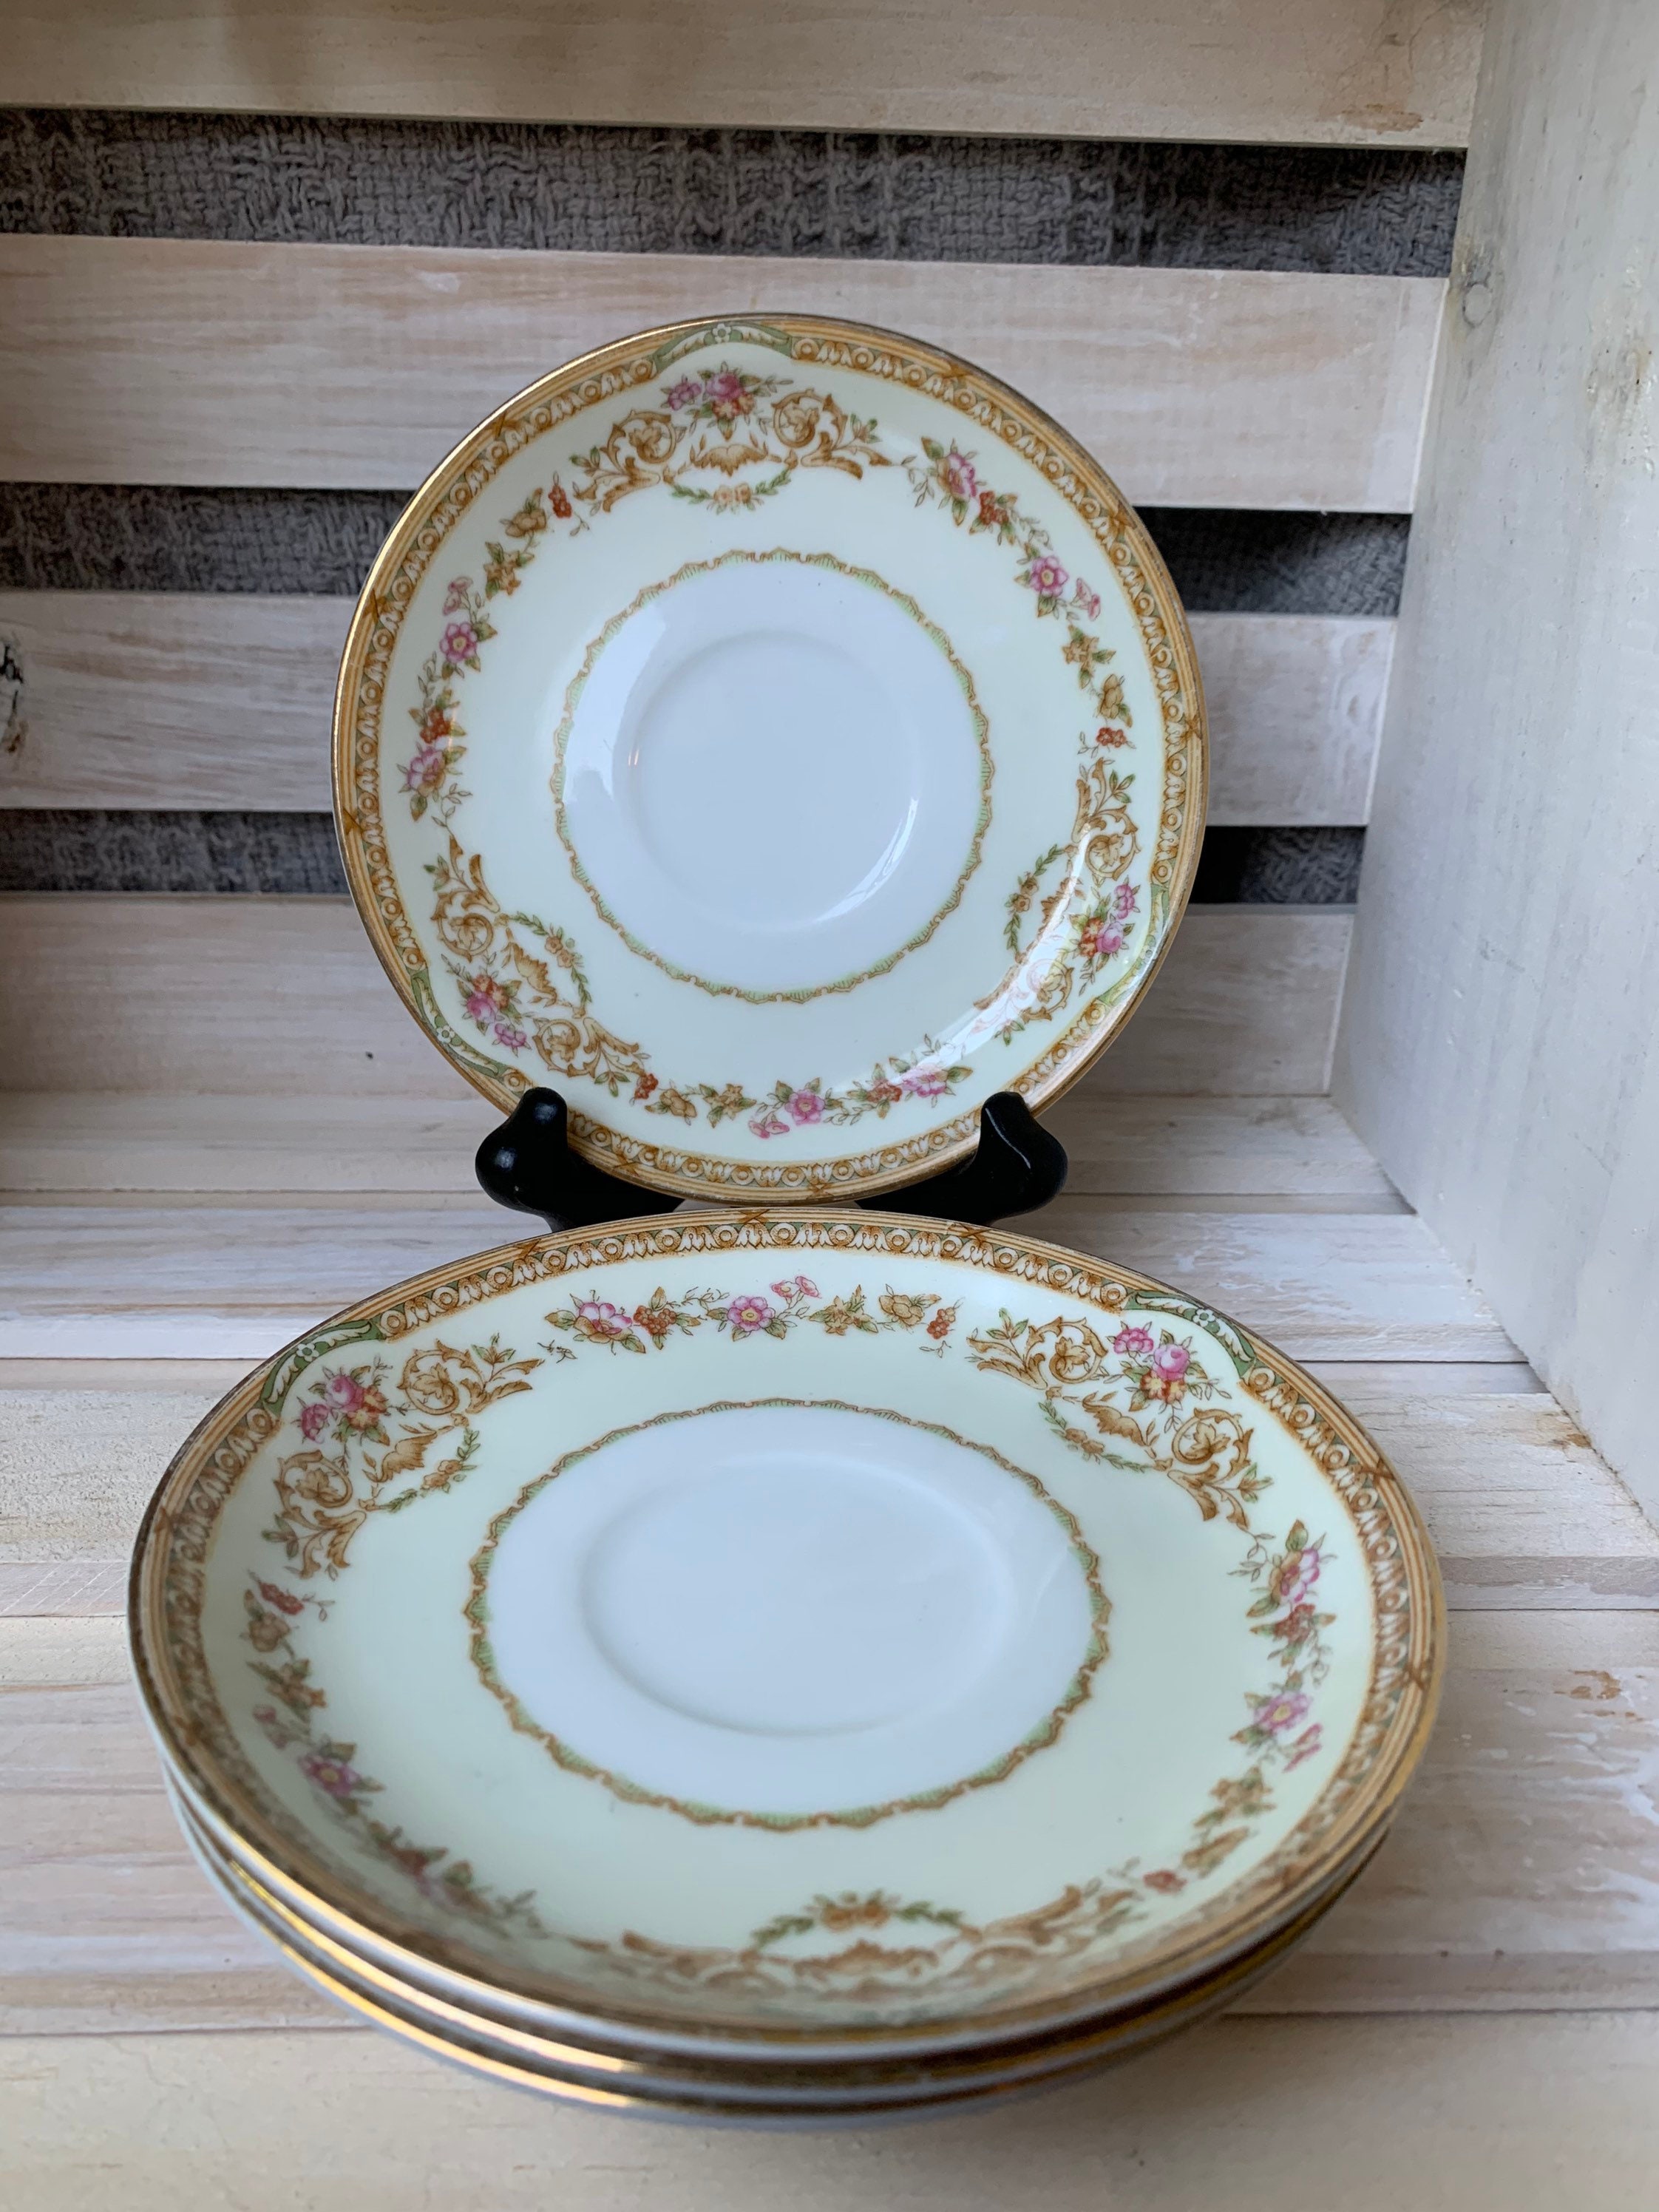 Narumi China Japan for sale | Only 4 left at -75%